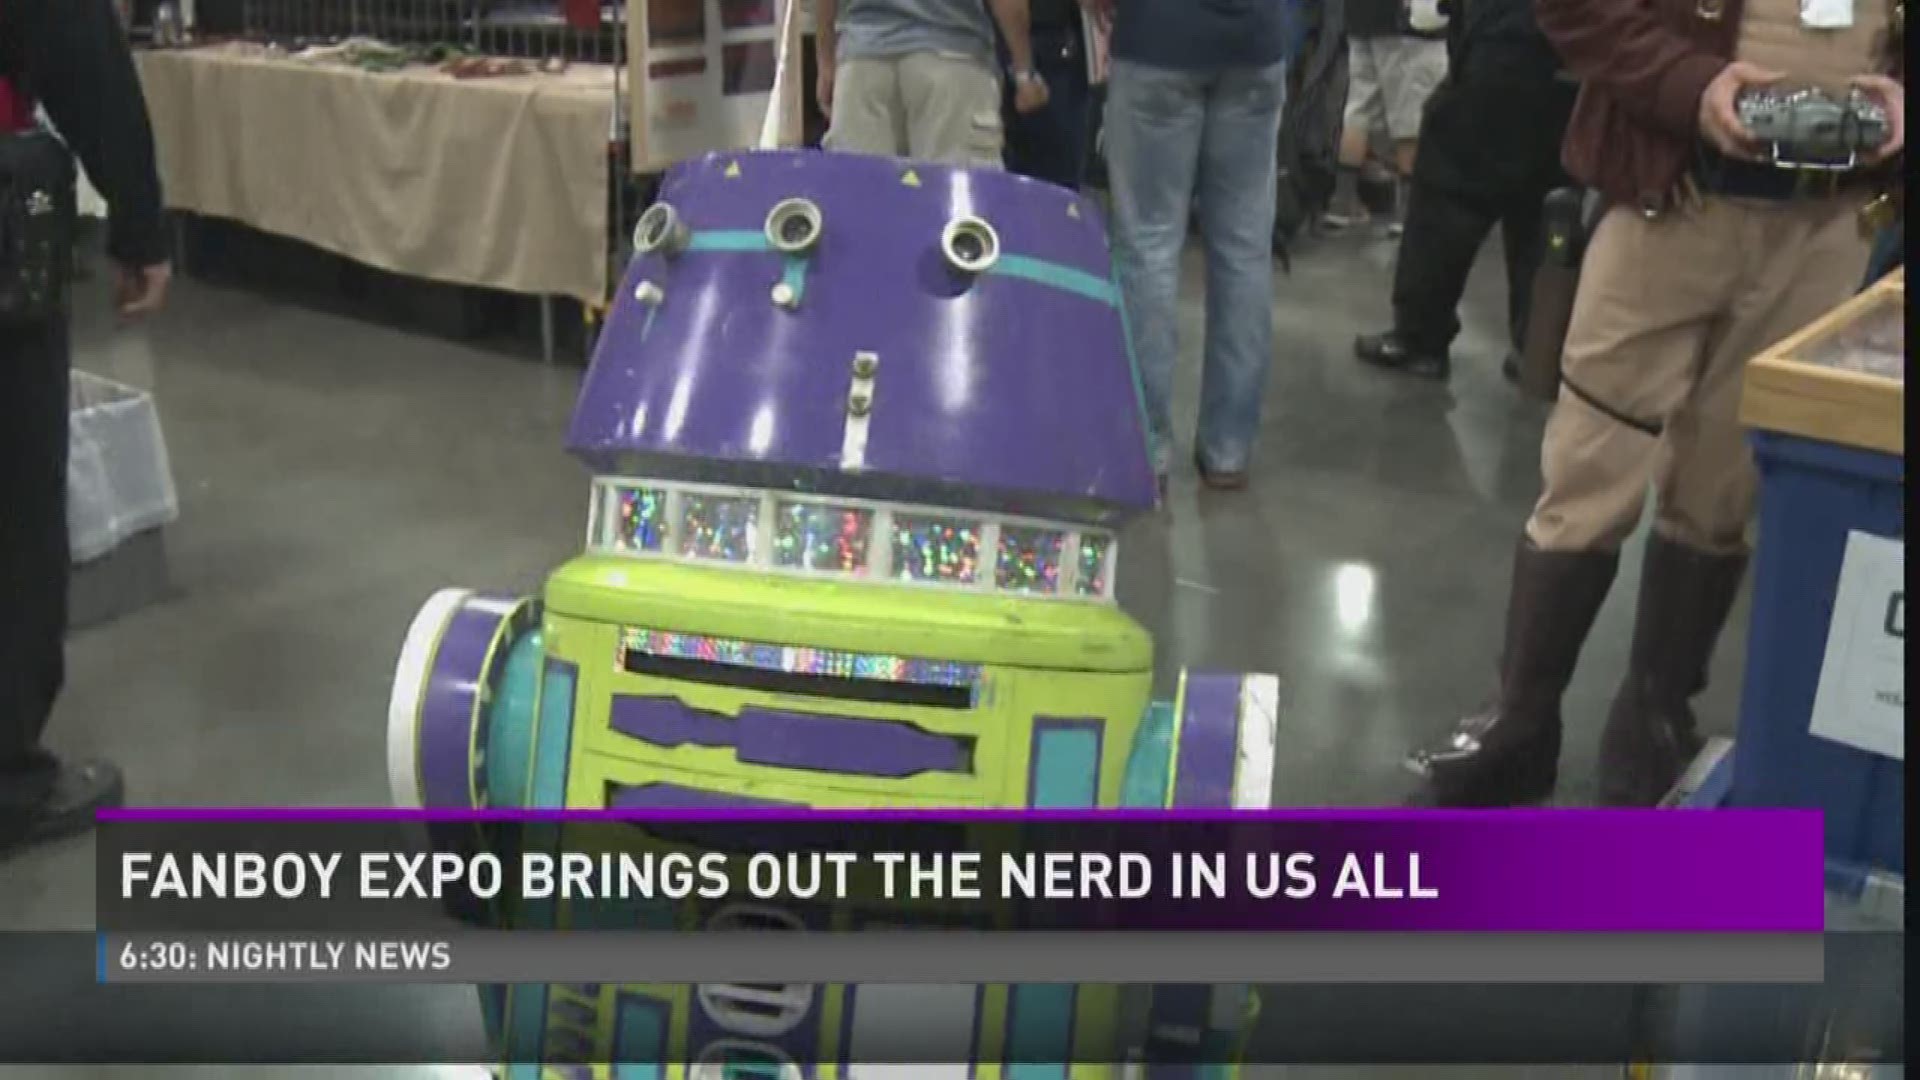 June 24, 2017: Comic book lovers, superheroes and celebrities turned out for the Fanboy Expo Knoxville Comic Con.